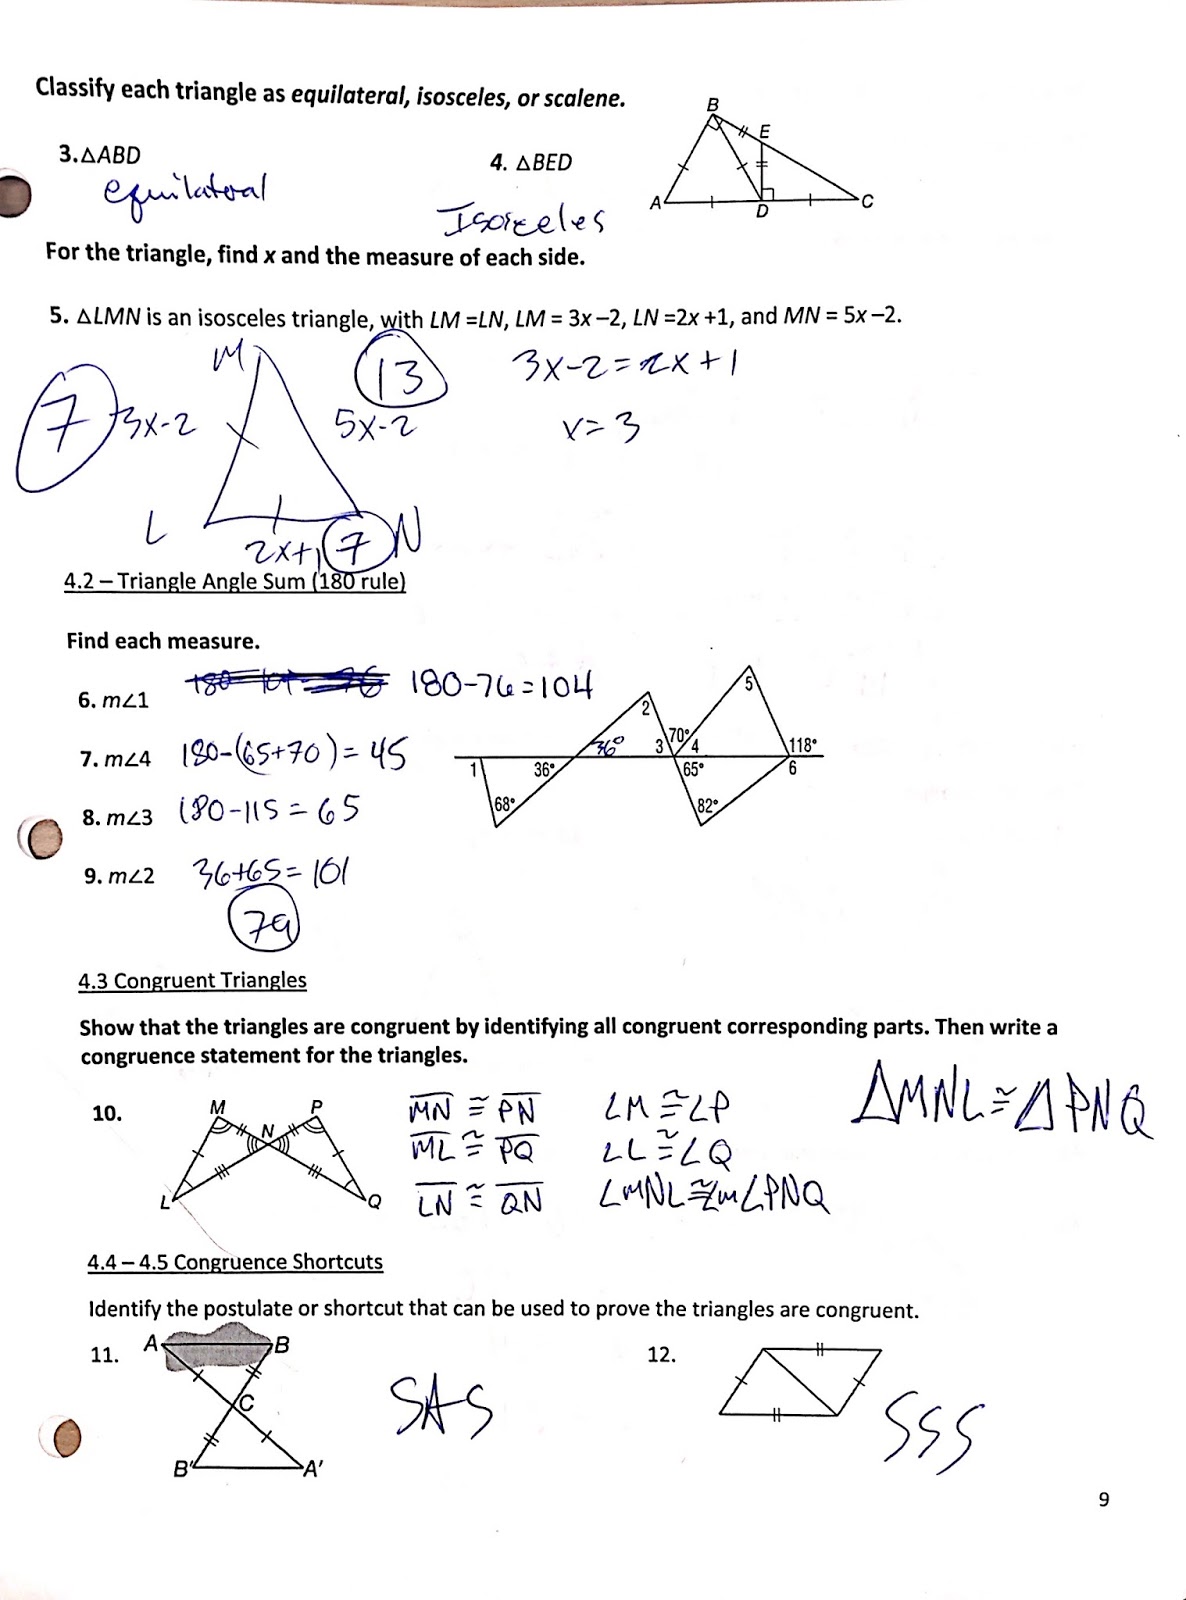 lesson 1.5 assignment geometry answers